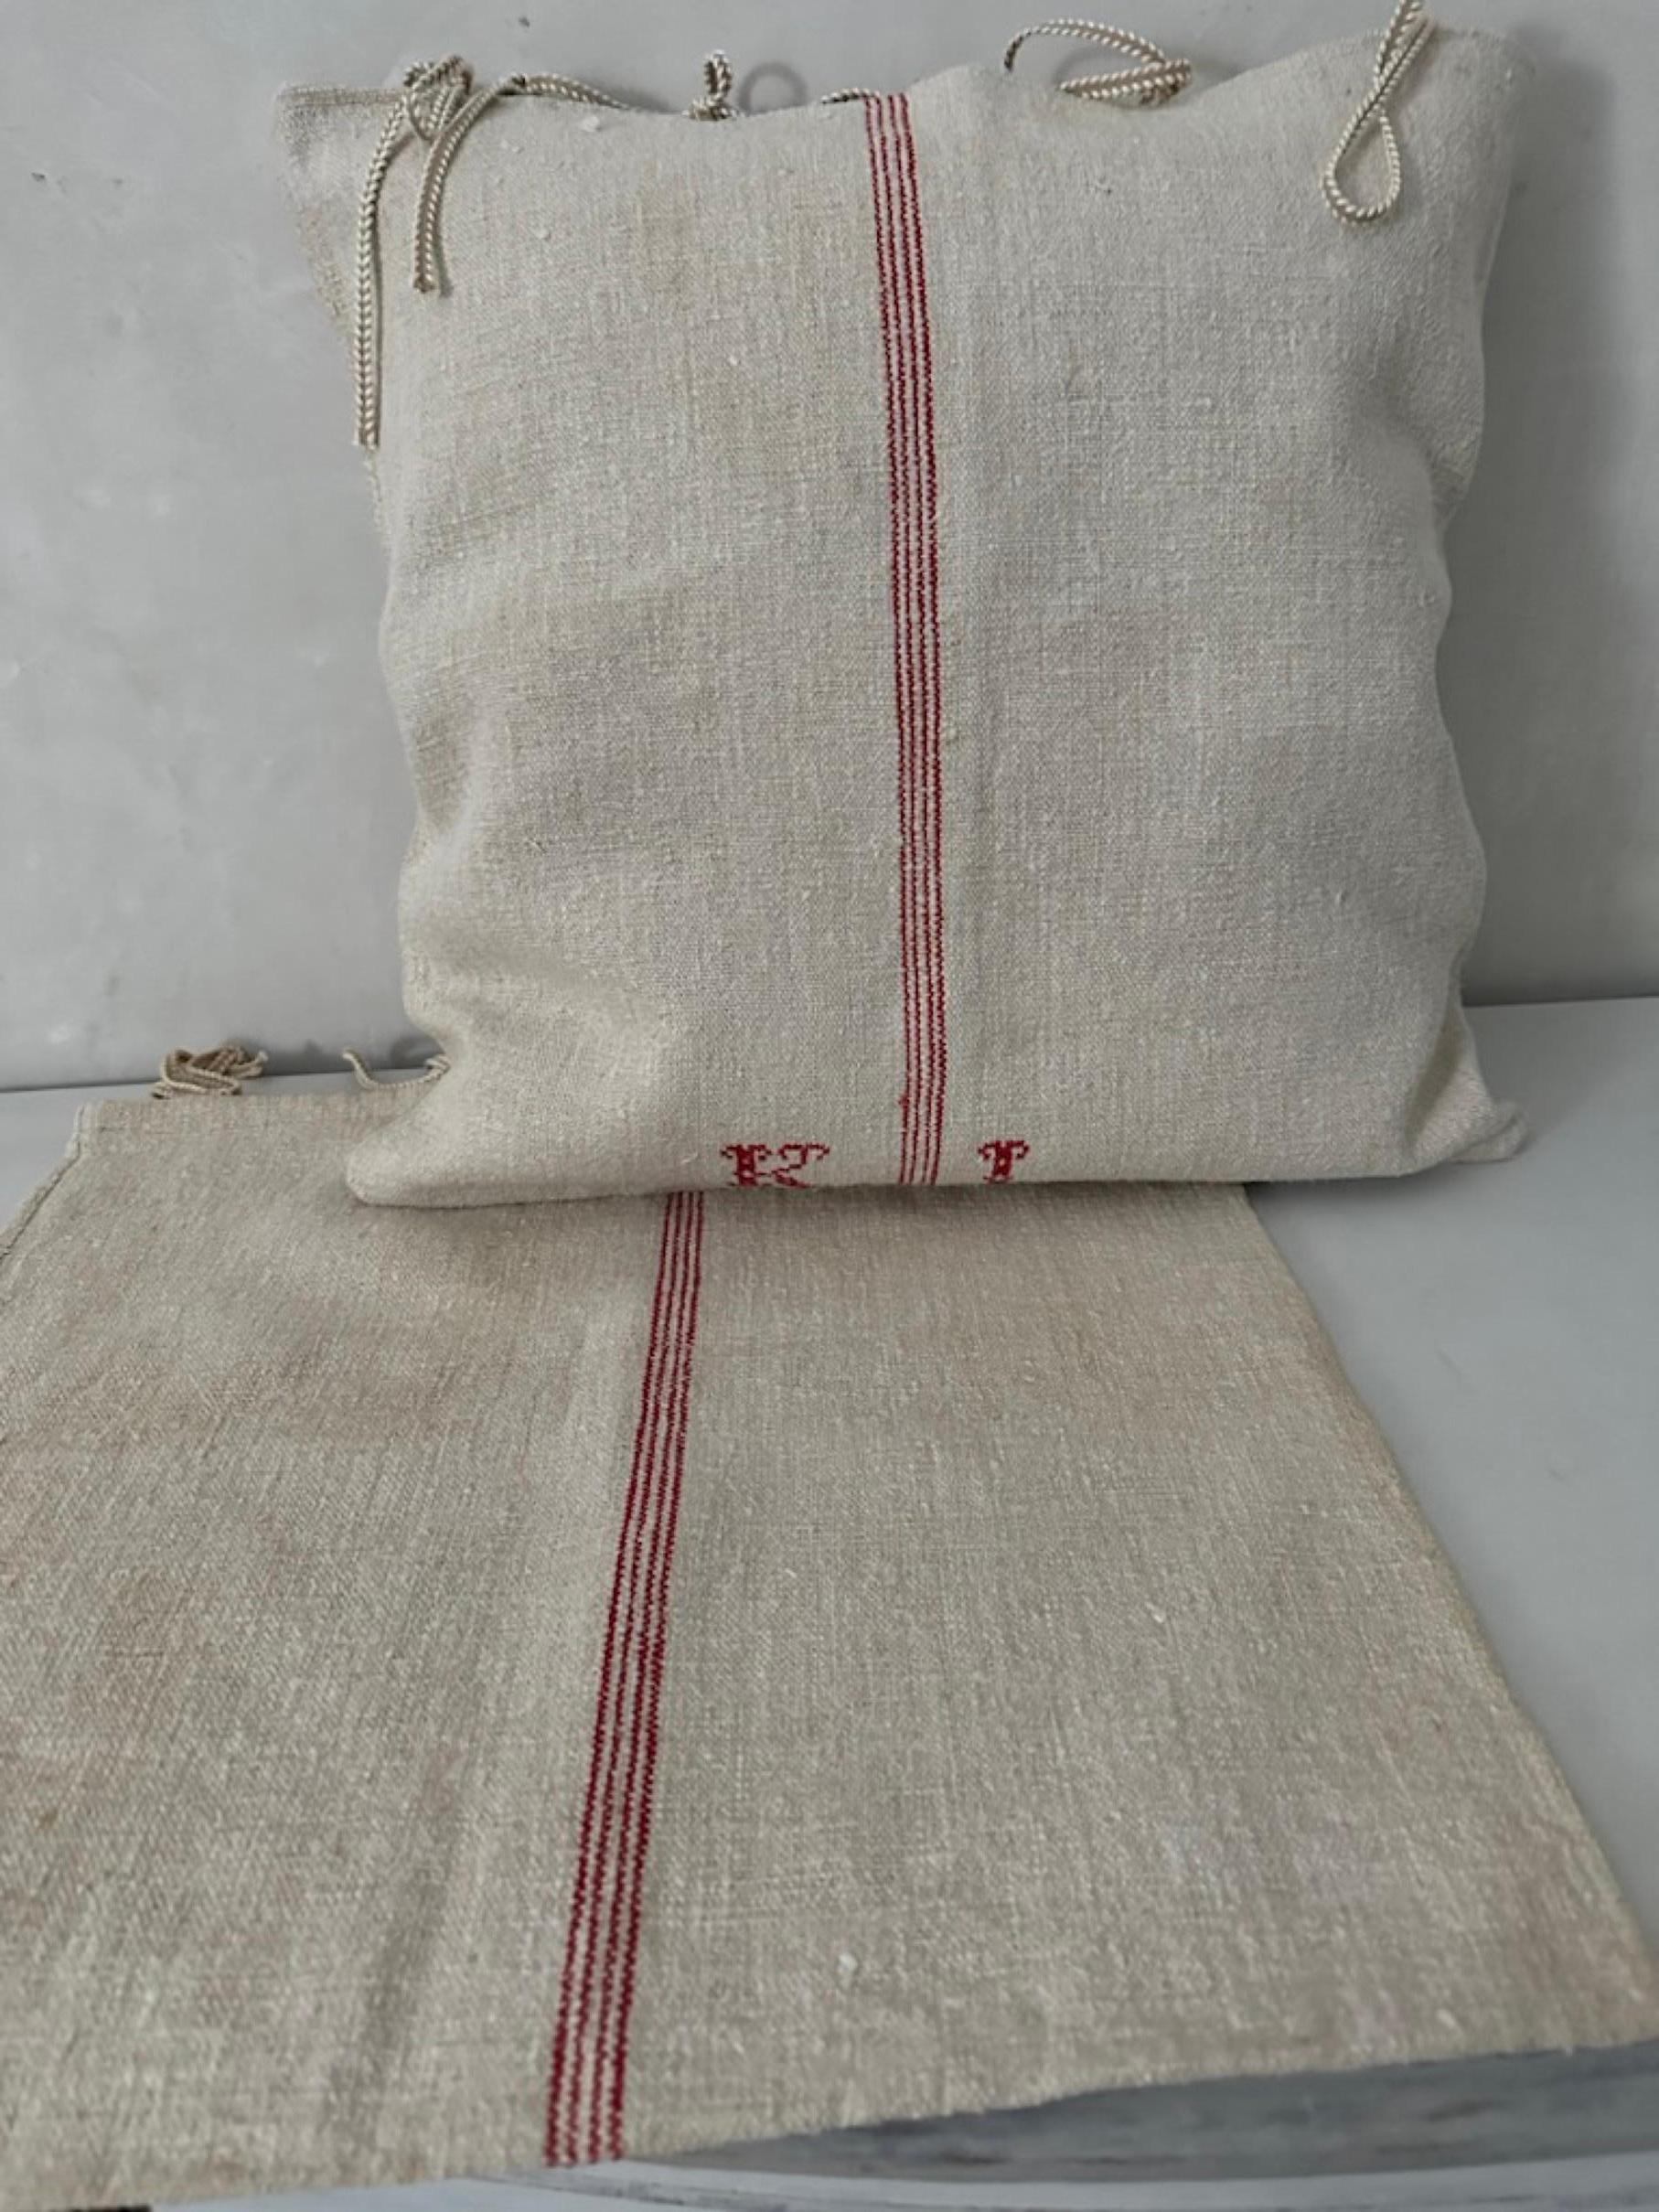 A single heavy weight grain feed sack from Europe has been made into two pillow cases with tassel closure. The woven hemp has monograms and center striping woven into the sack. 
Only one pillow has the monogram, the second with center stripes on